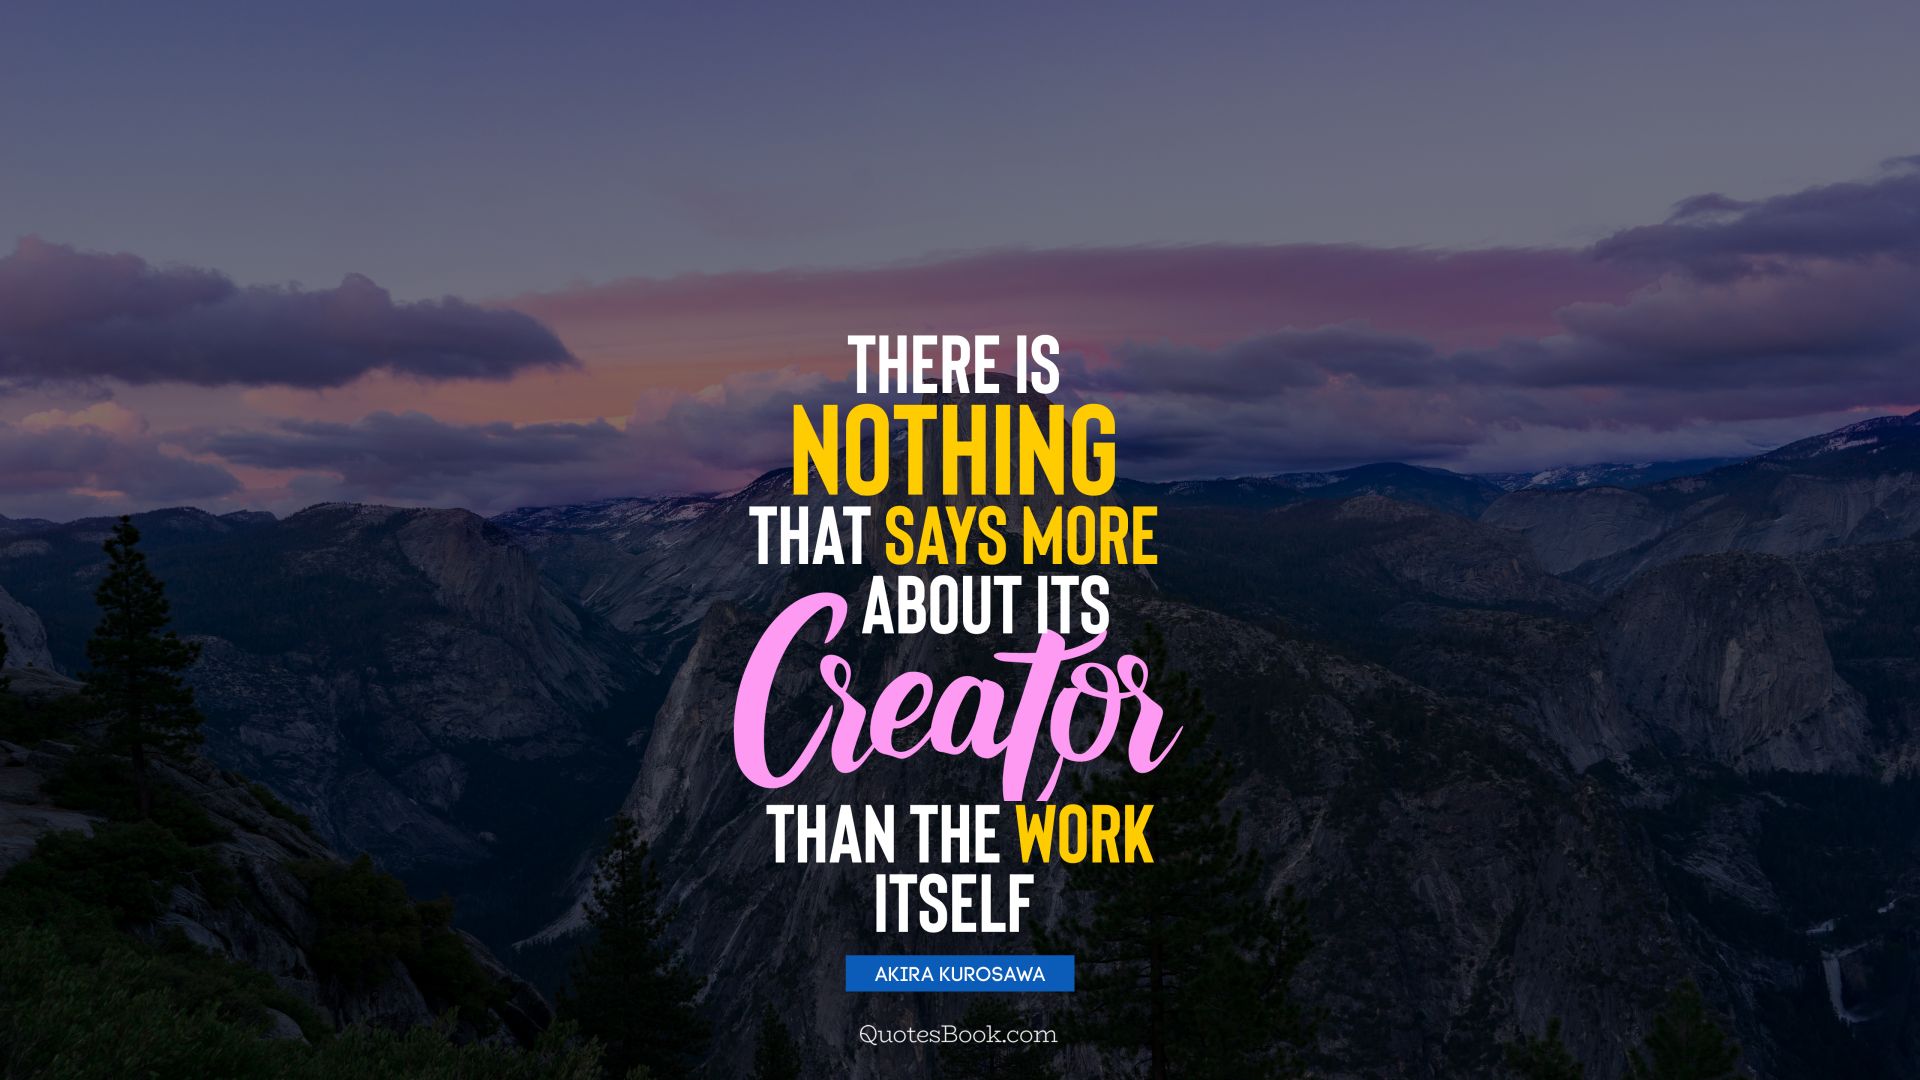 There is nothing that says more about its creator than the work itself. - Quote by Akira Kurosawa